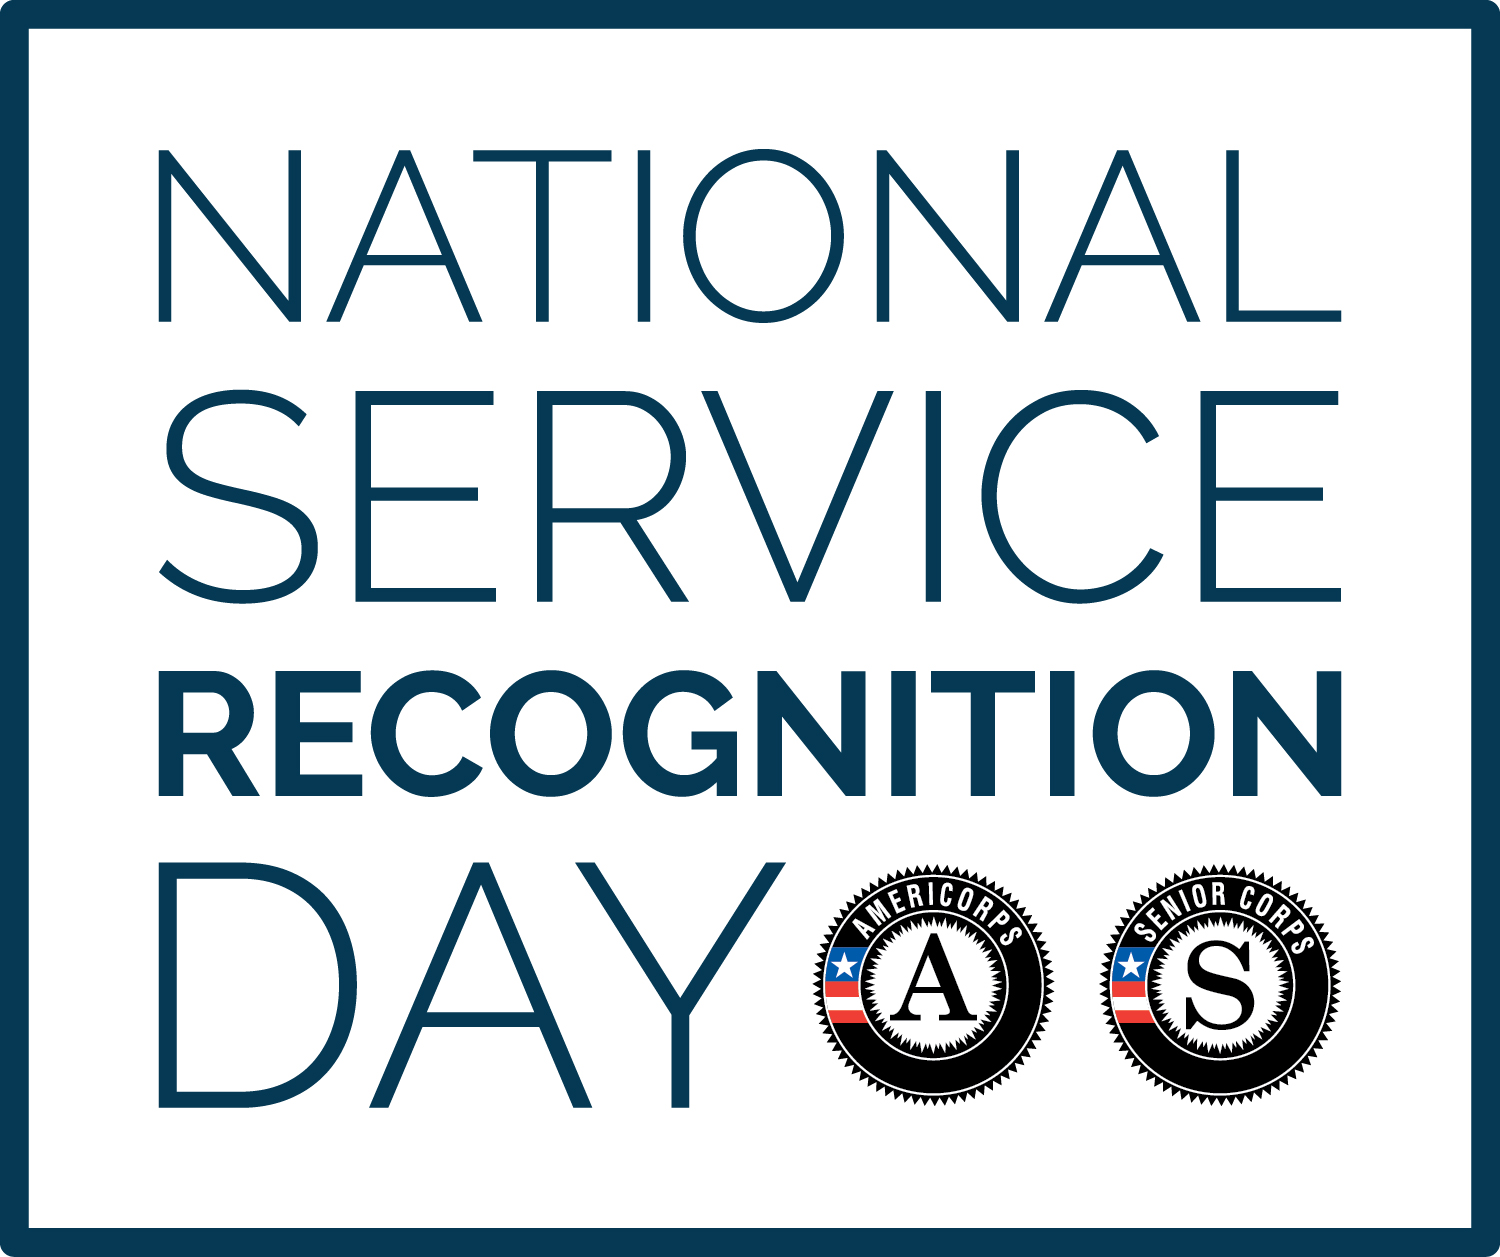 National Service Recognition Day: Celebrate Your Service!